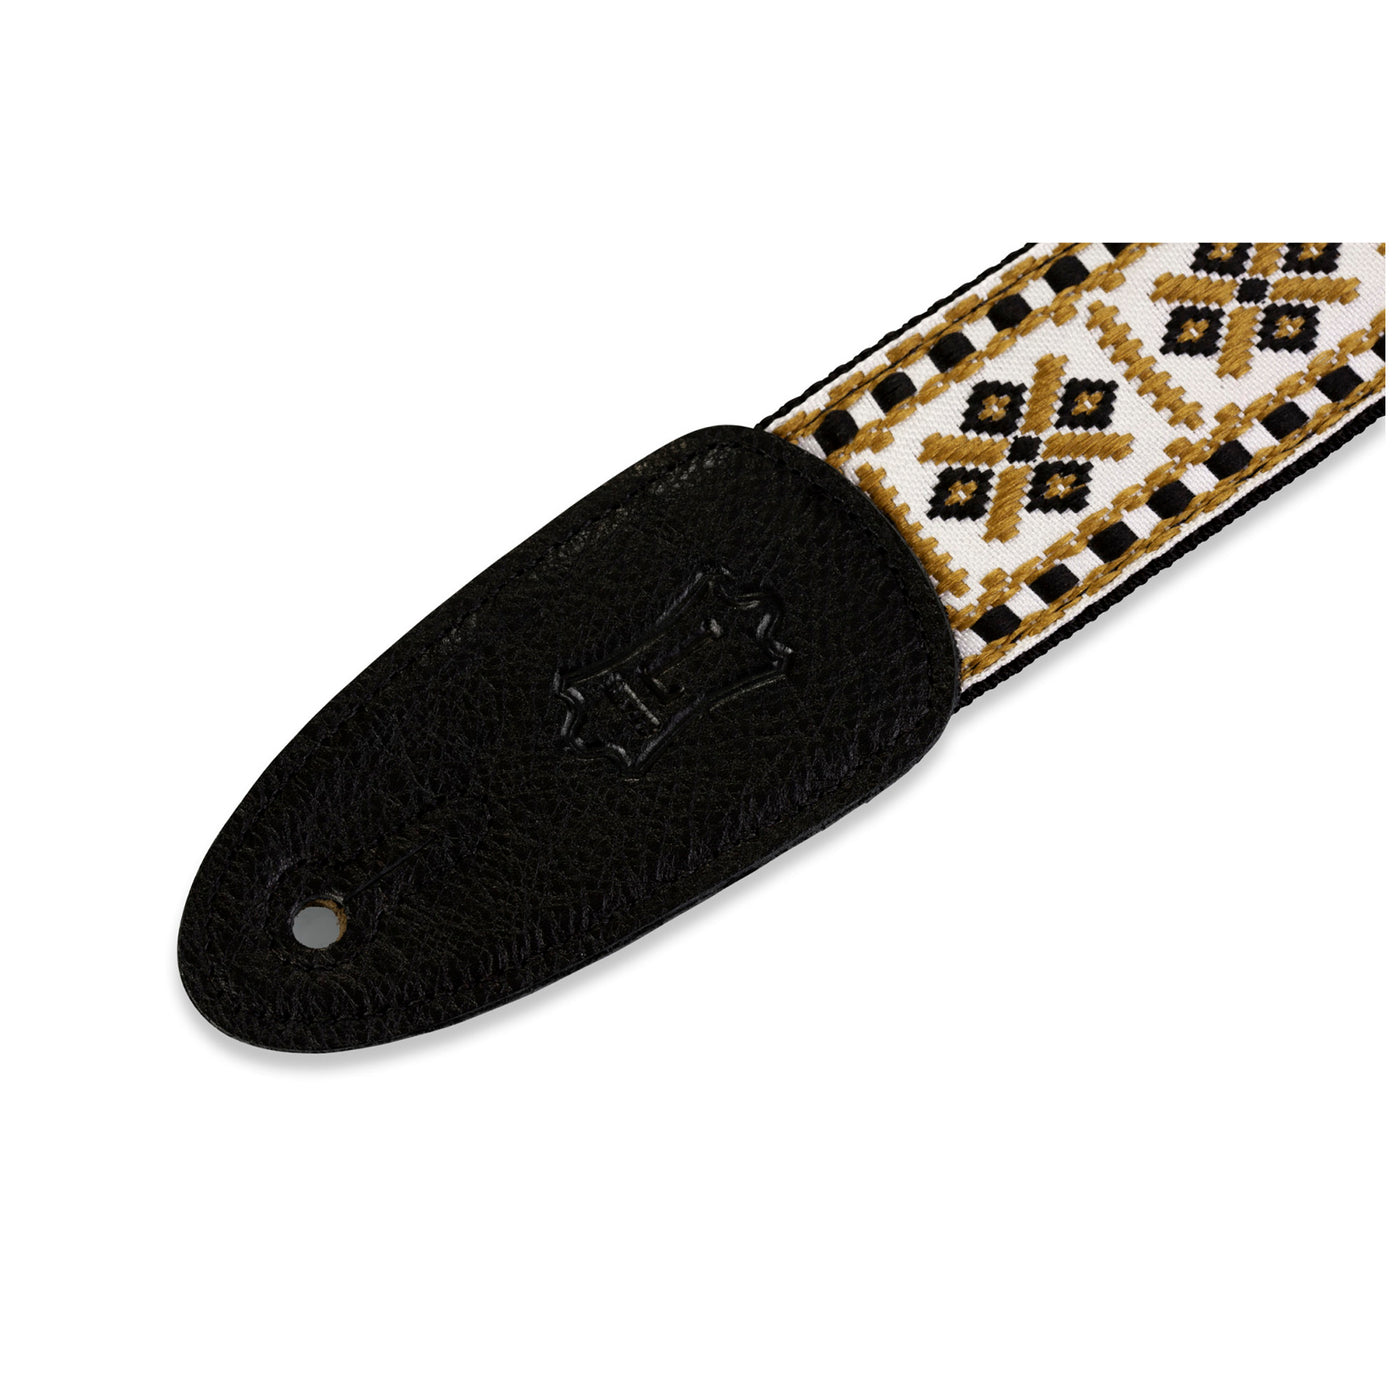 Levy's 2" Woven Strap in Gold Diamond